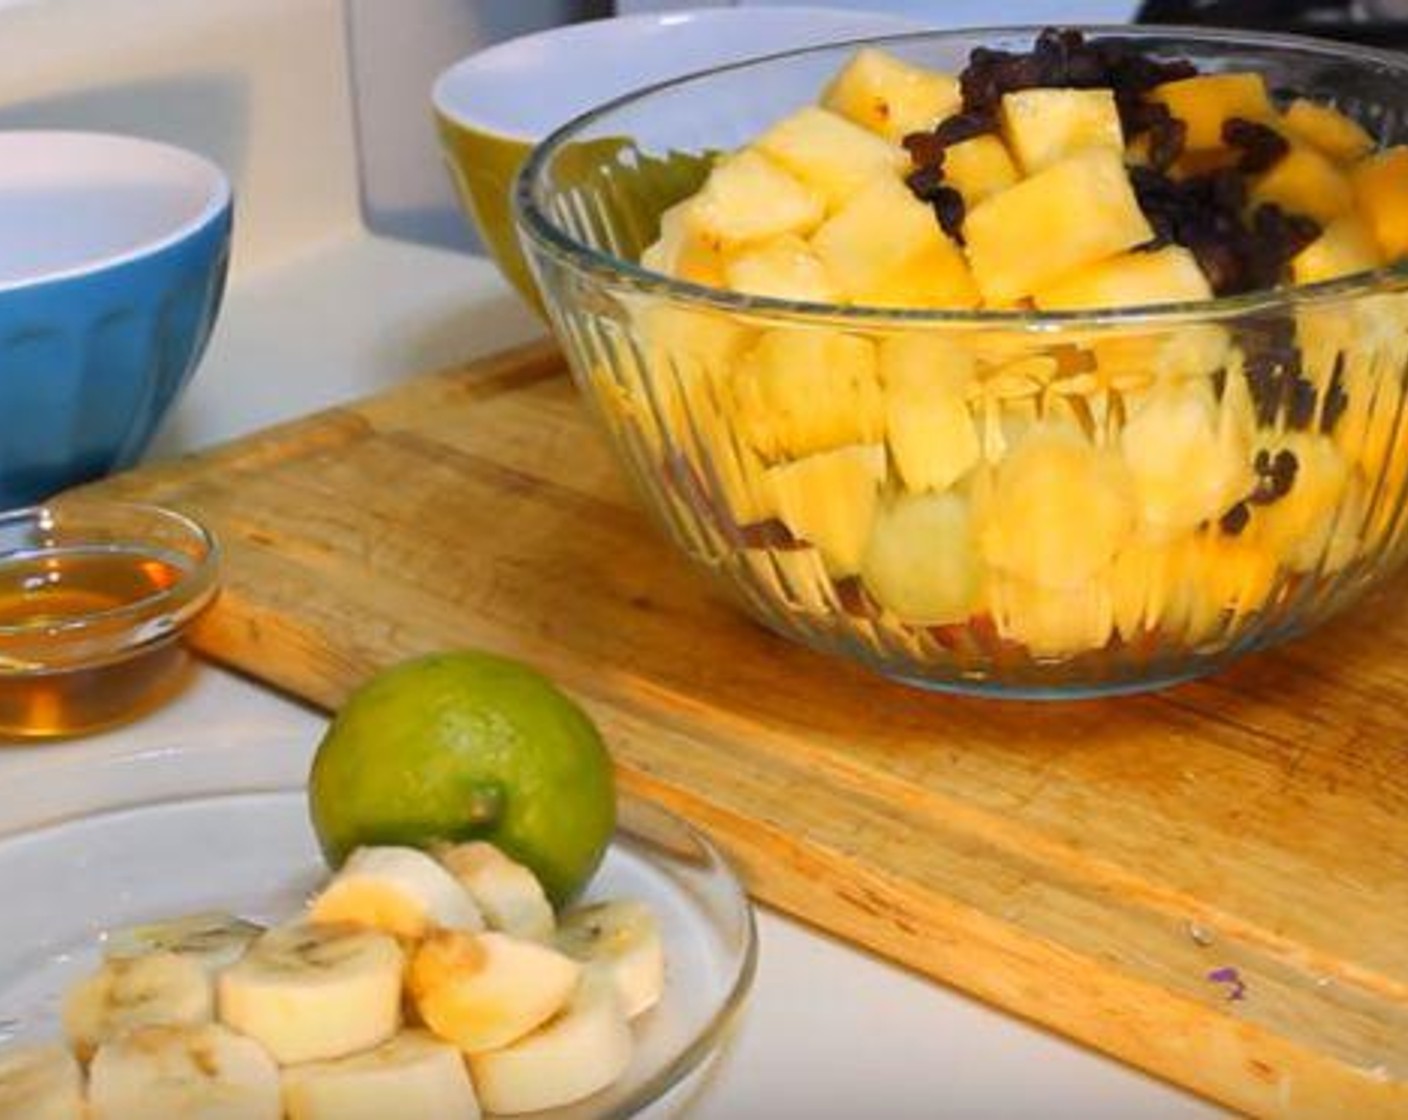 step 1 Add the Mangoes (2), Pineapples (2 cups), Honeydew Melons (2 cups), Banana (1), Raisins (1/4 cup), and Apple (1) to a large bowl.